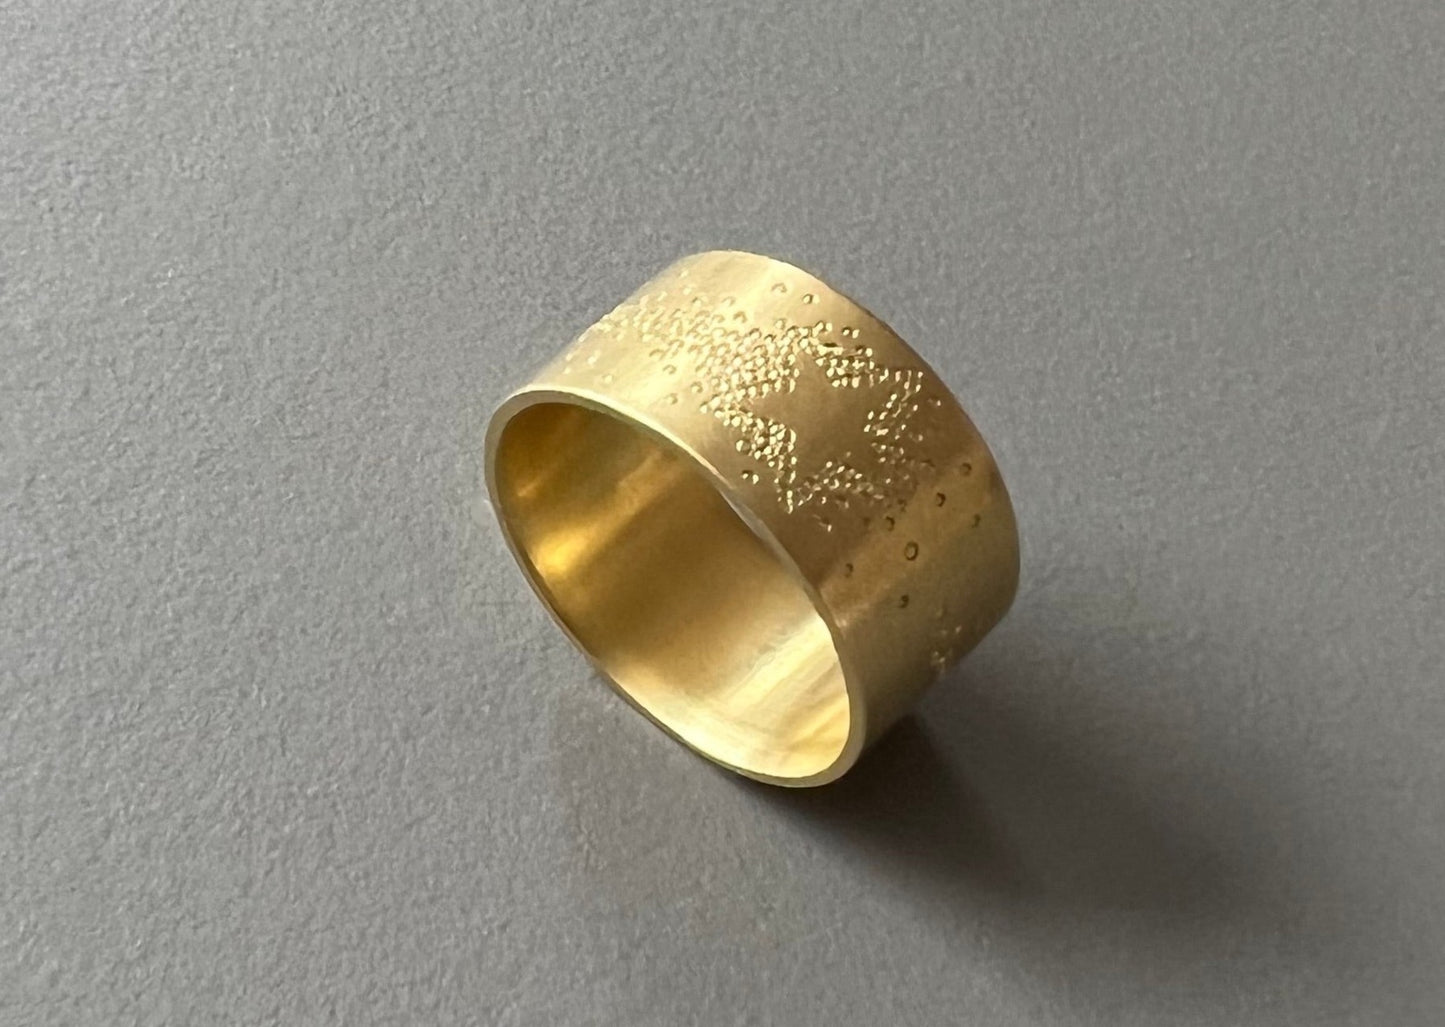 wide golden band ring with shooting star design